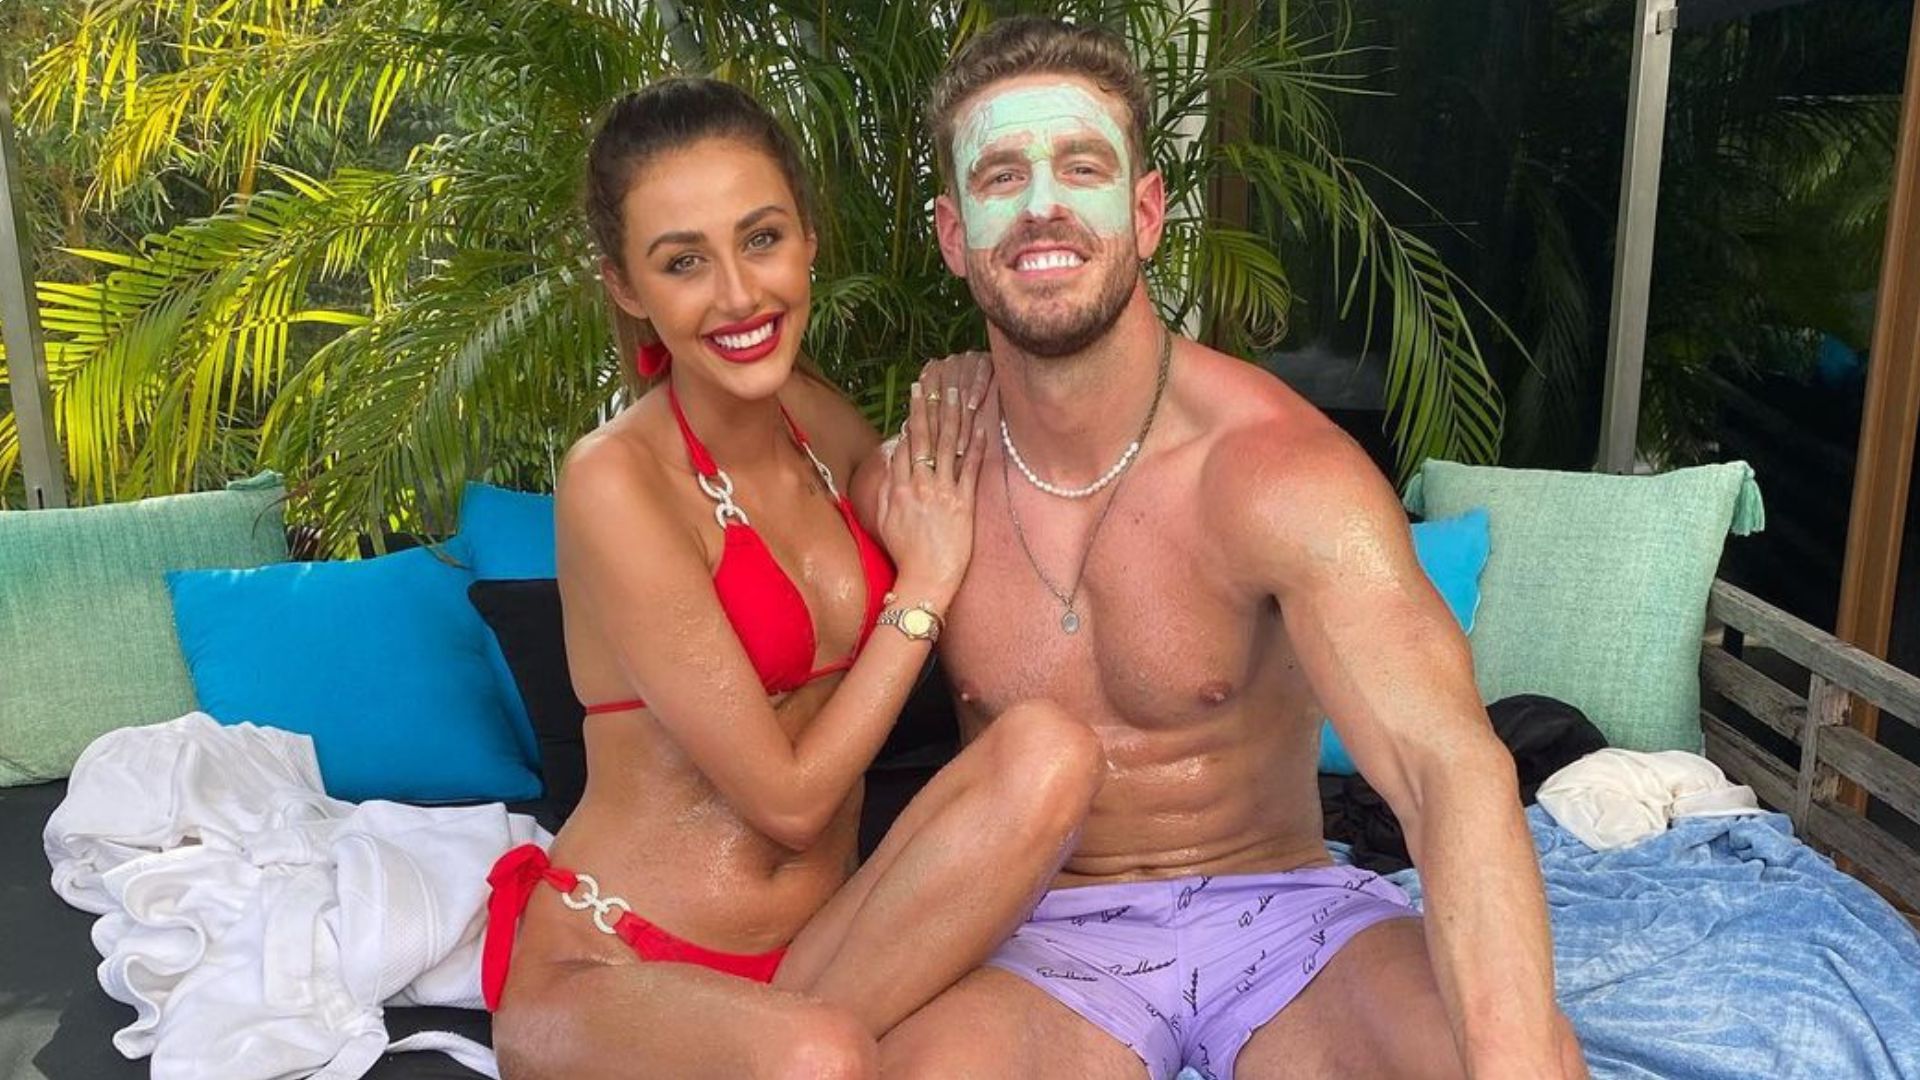 Perfect Match': Are Chloe and Shayne Still Together?